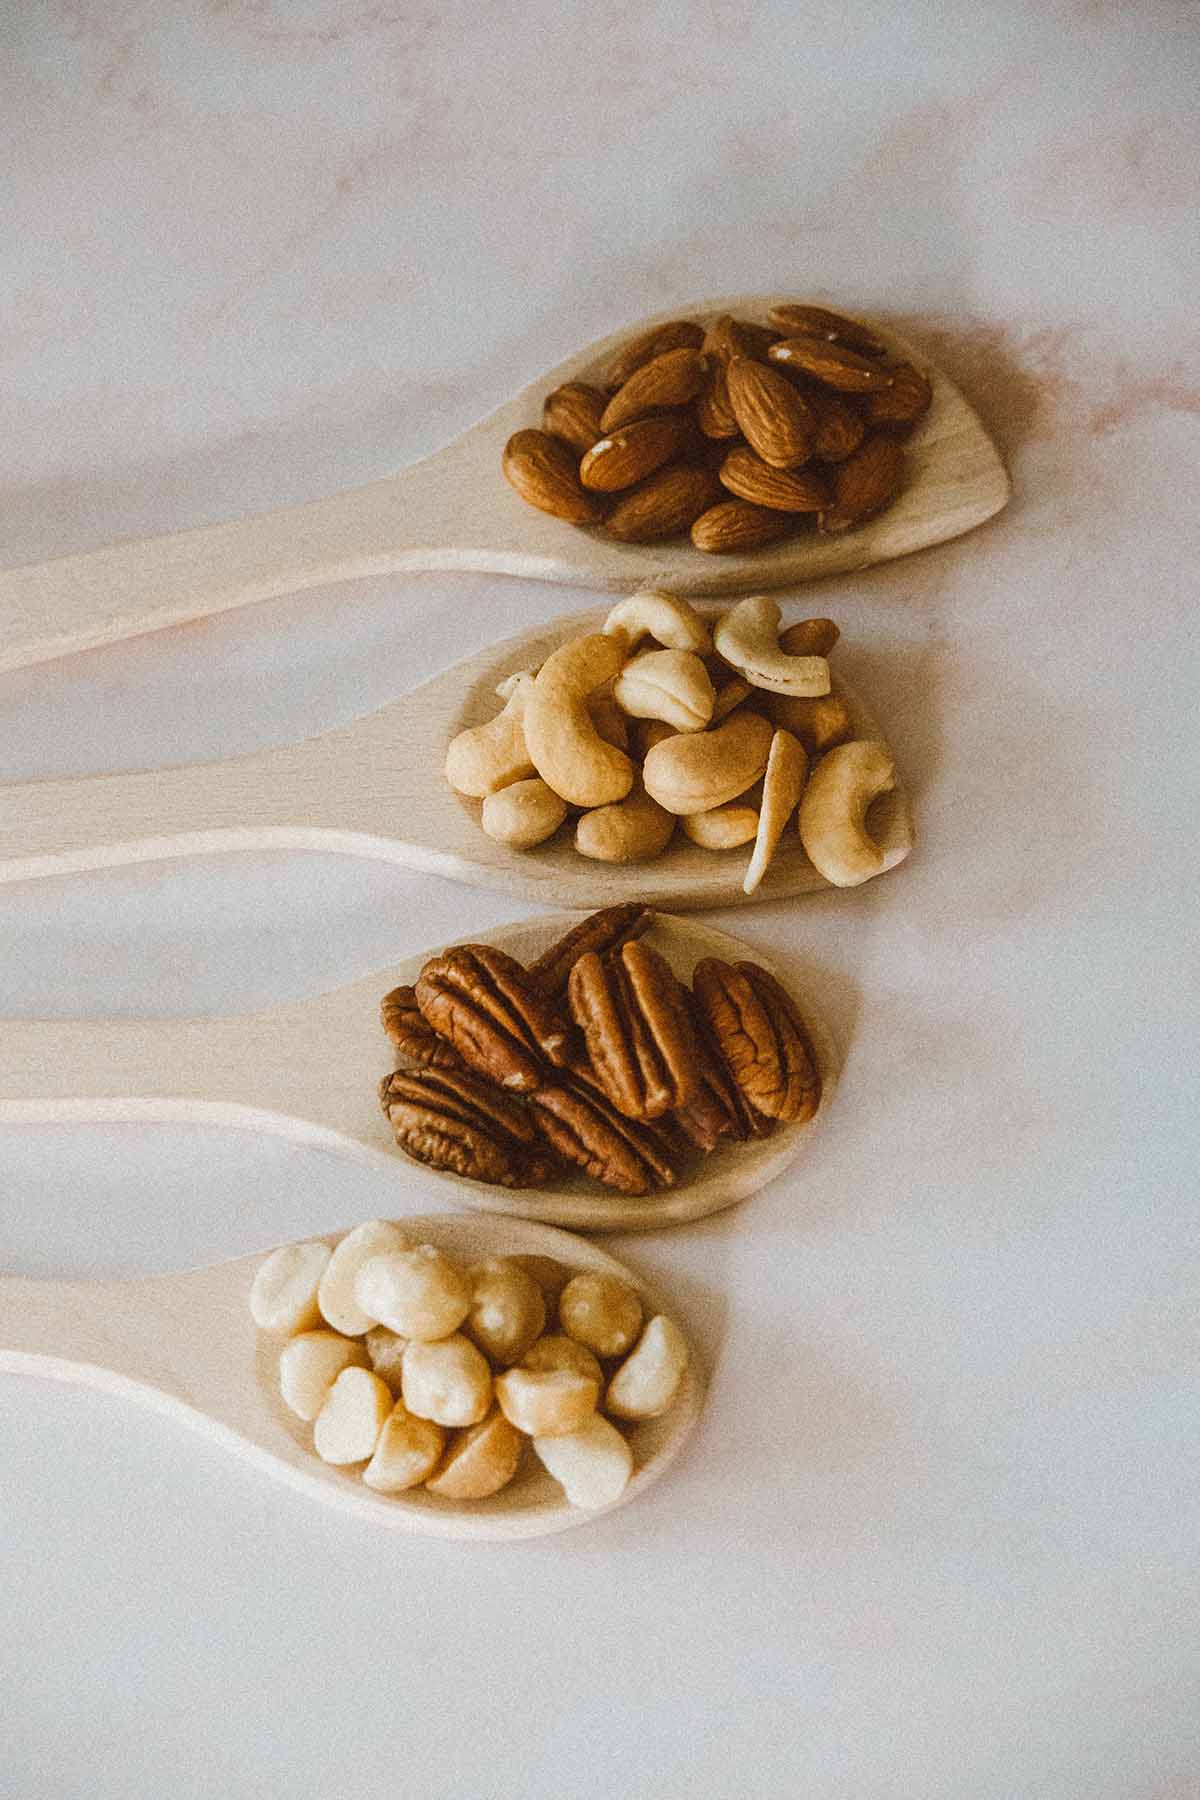 Almonds, cashews, pecans, and macadamia nuts in wooden spoons.